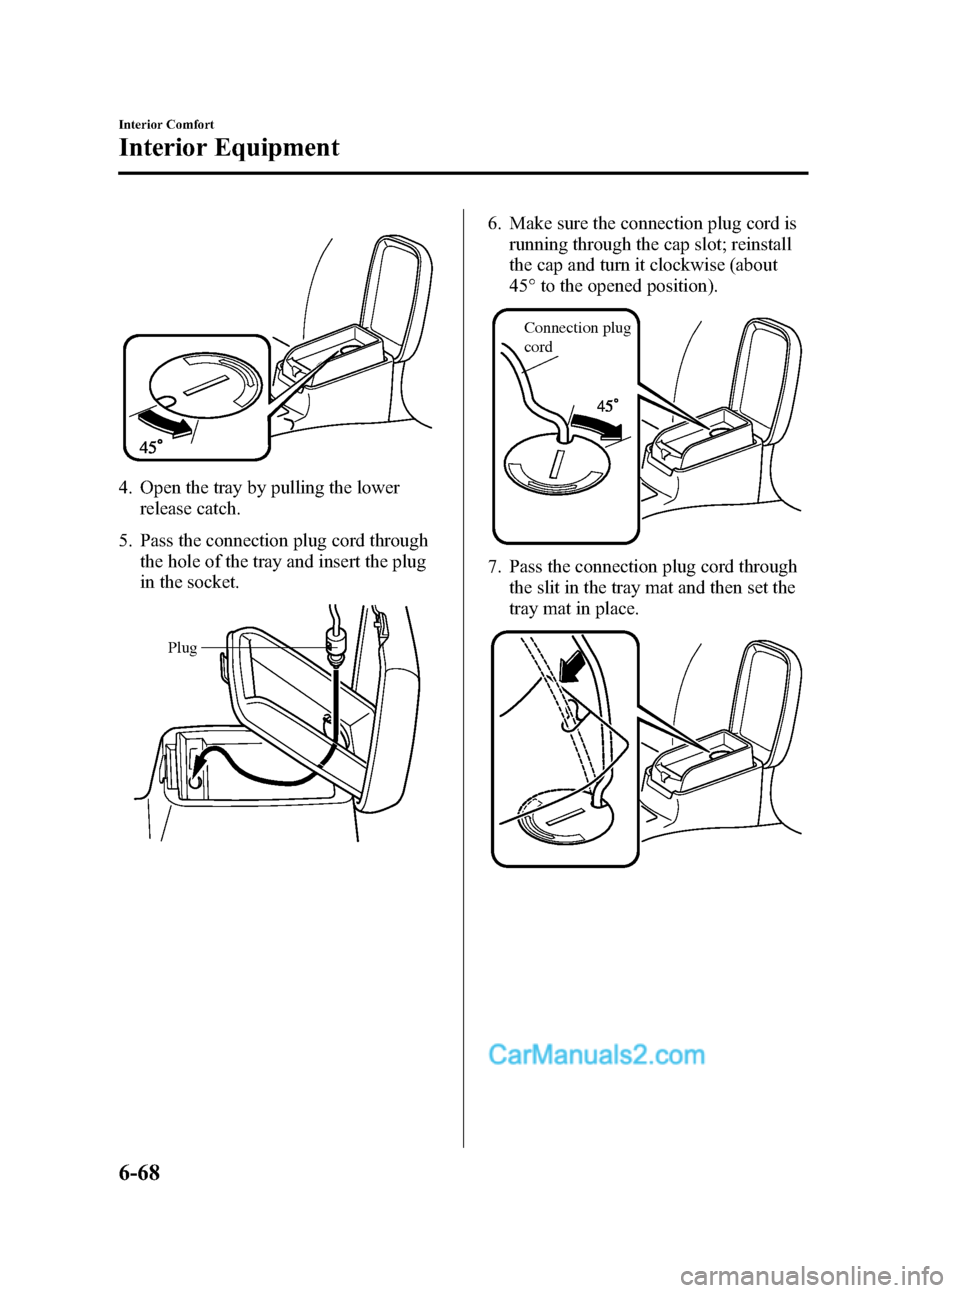 MAZDA MODEL MAZDASPEED 3 2007  Owners Manual (in English) Black plate (252,1)
4. Open the tray by pulling the lower
release catch.
5. Pass the connection plug cord through
the hole of the tray and insert the plug
in the socket.
Plug
6. Make sure the connecti